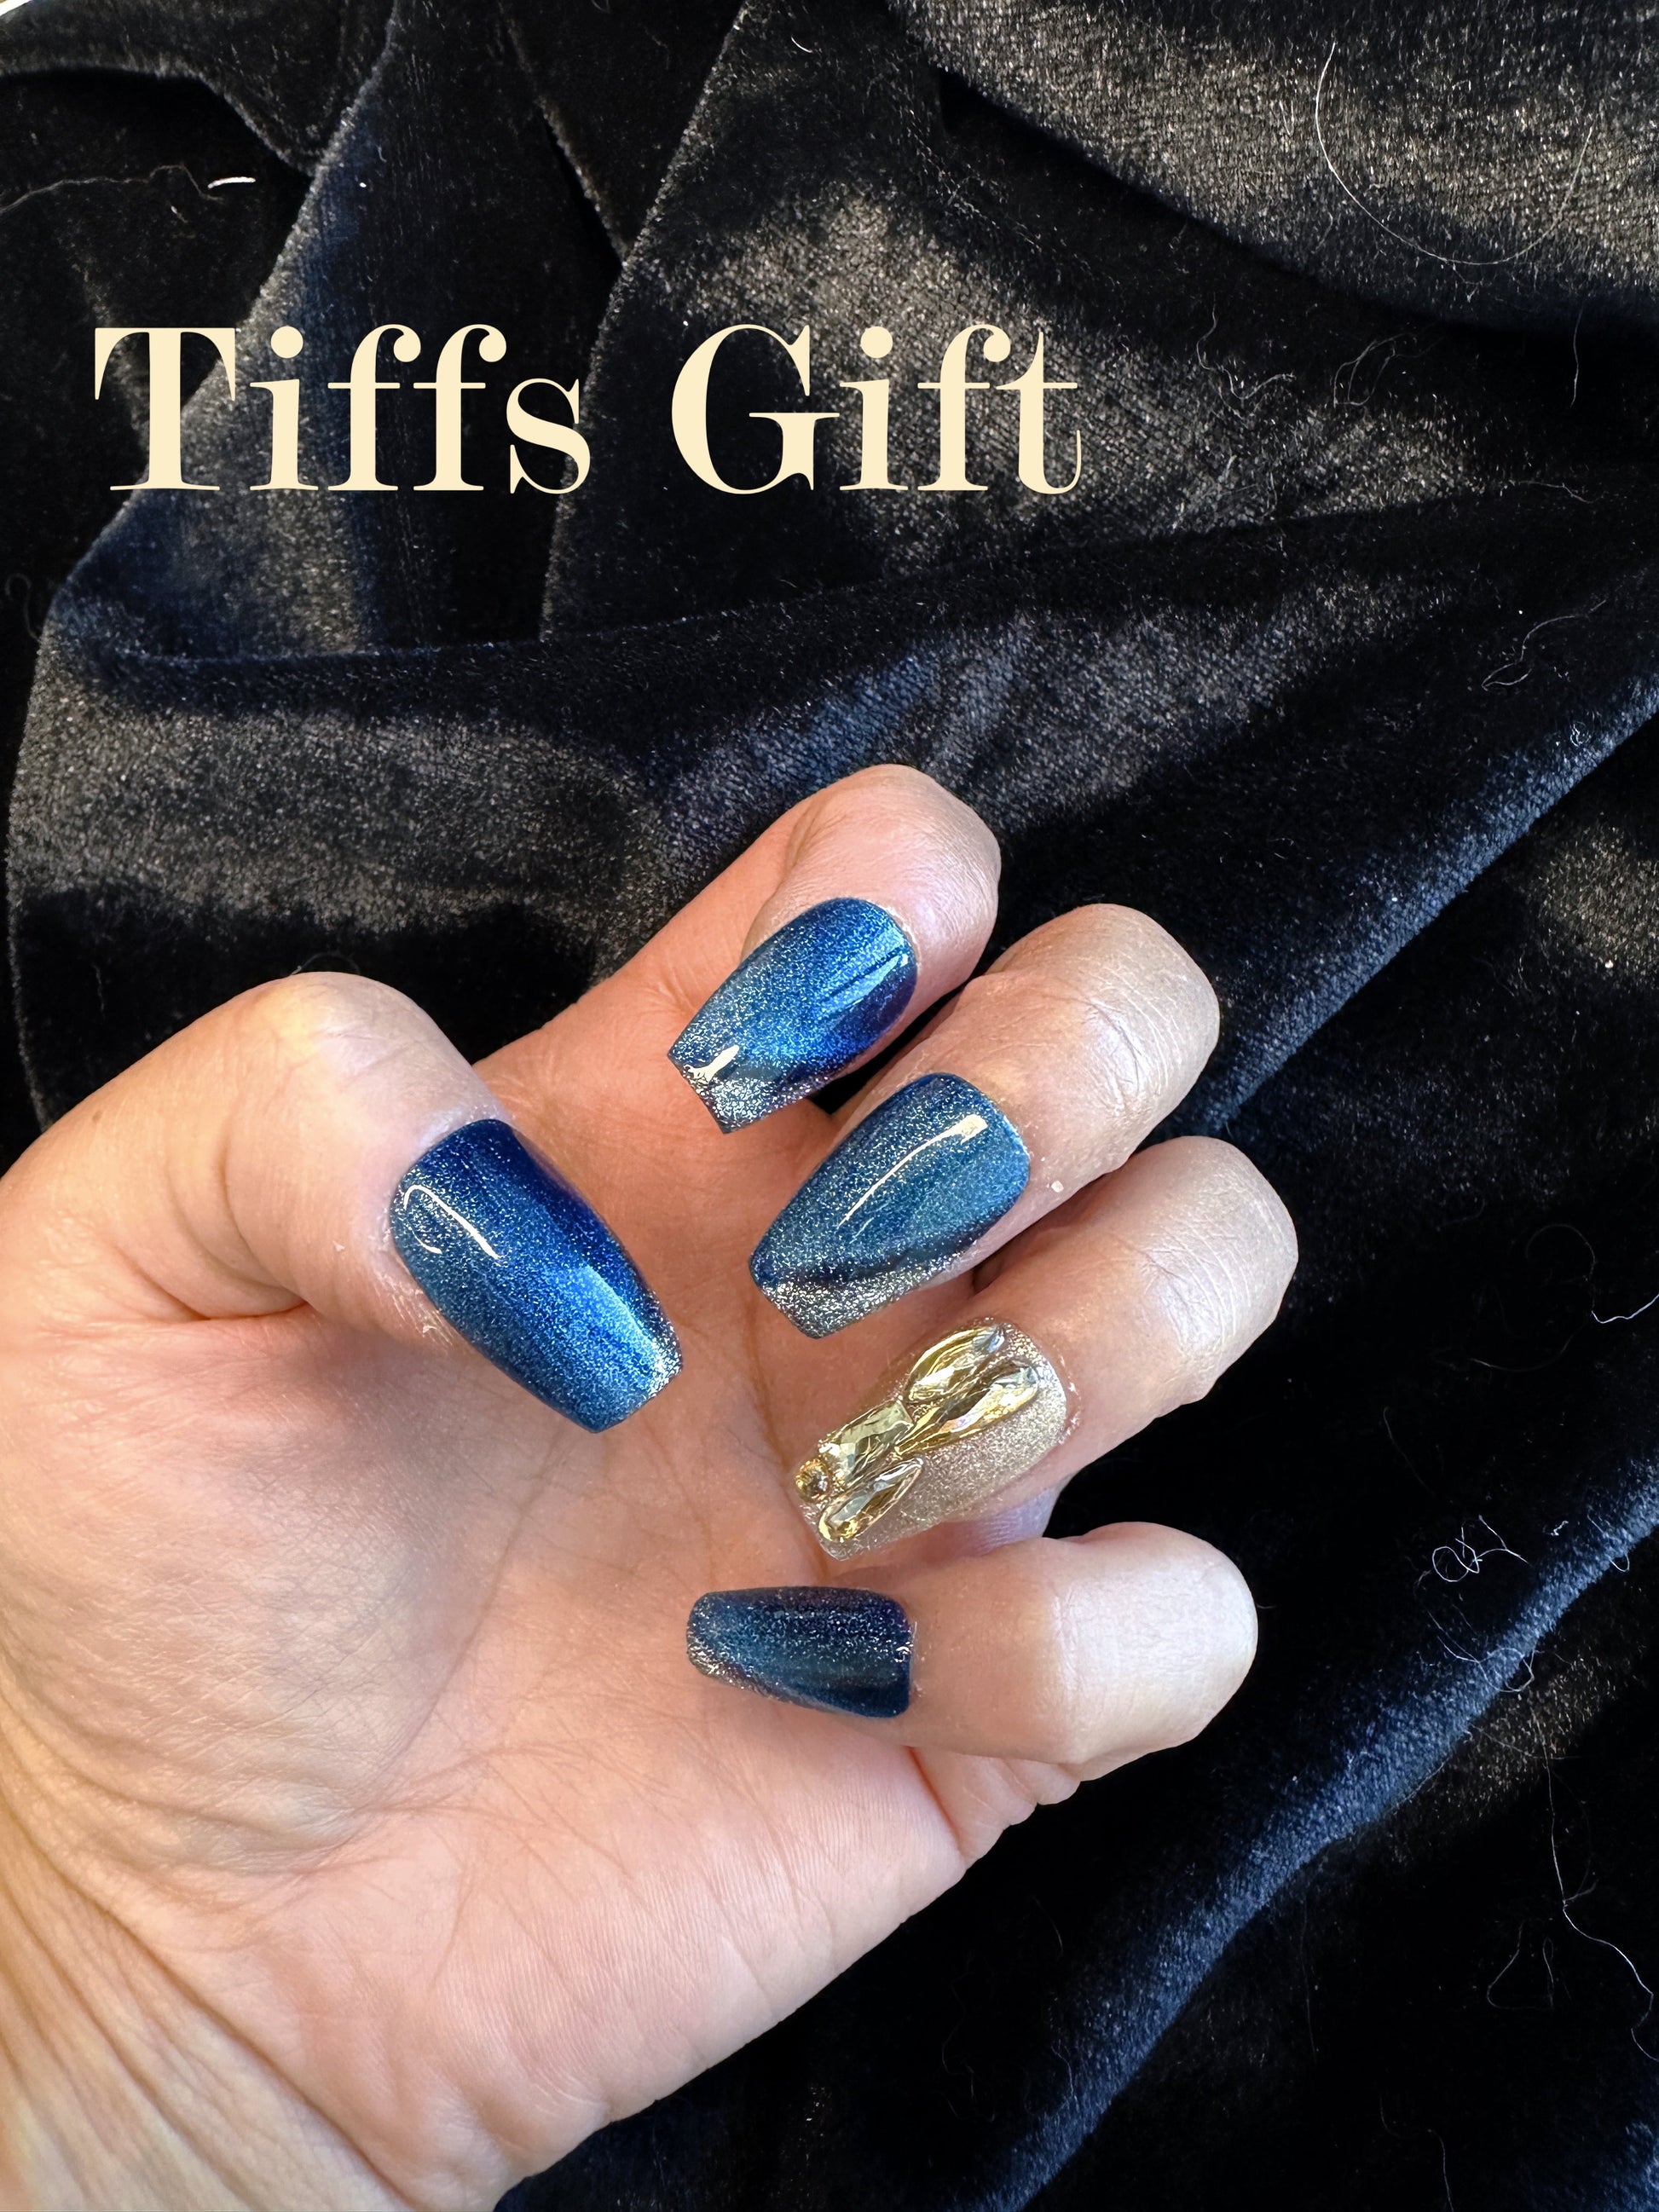 Blue Sapphire Reusable Hand Made Press On Nails High Quality - TiffsGift